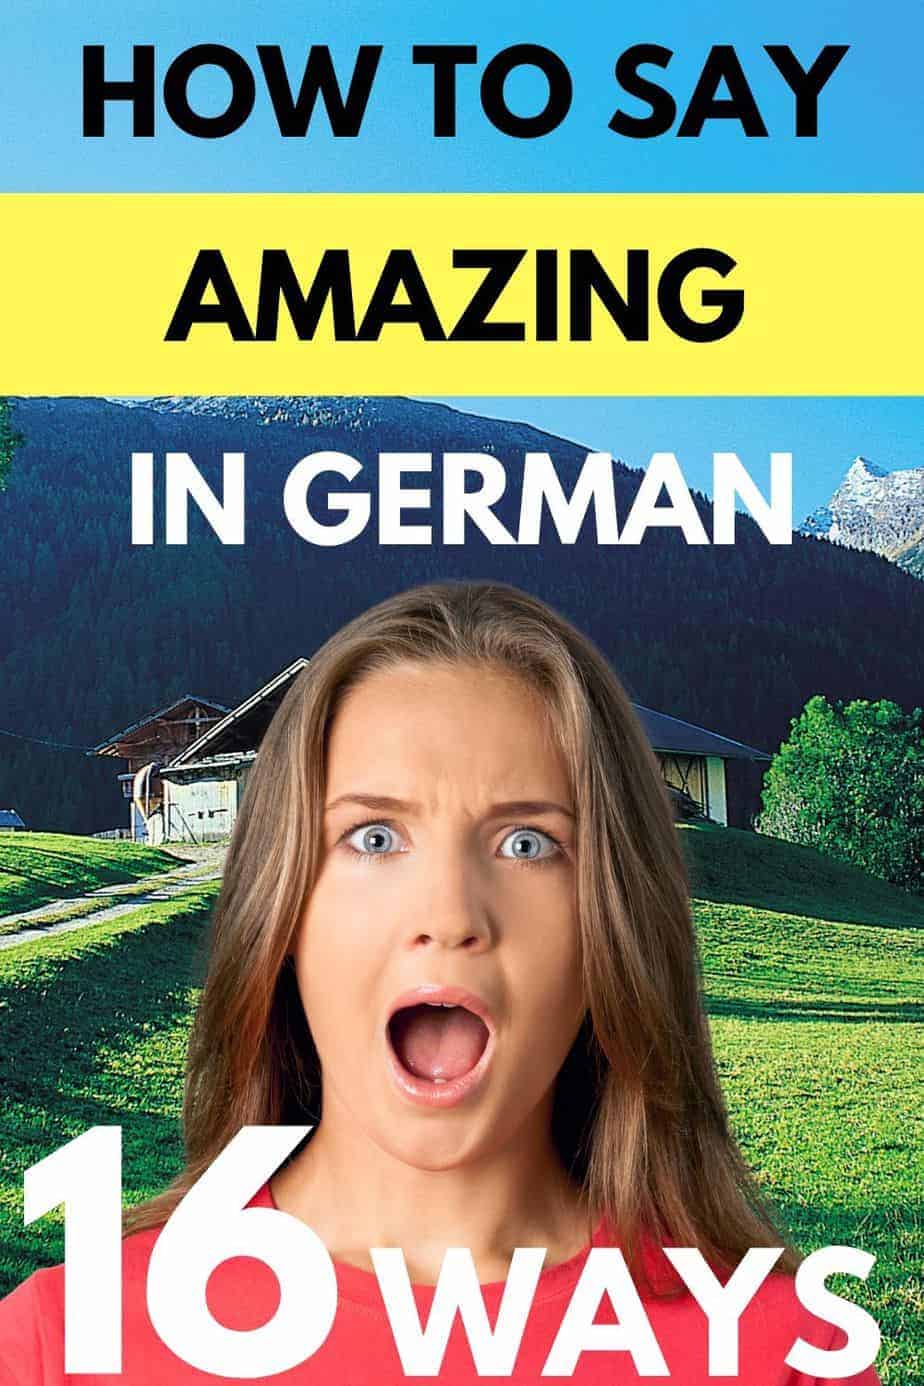 16 Ways to Say Amazing in German